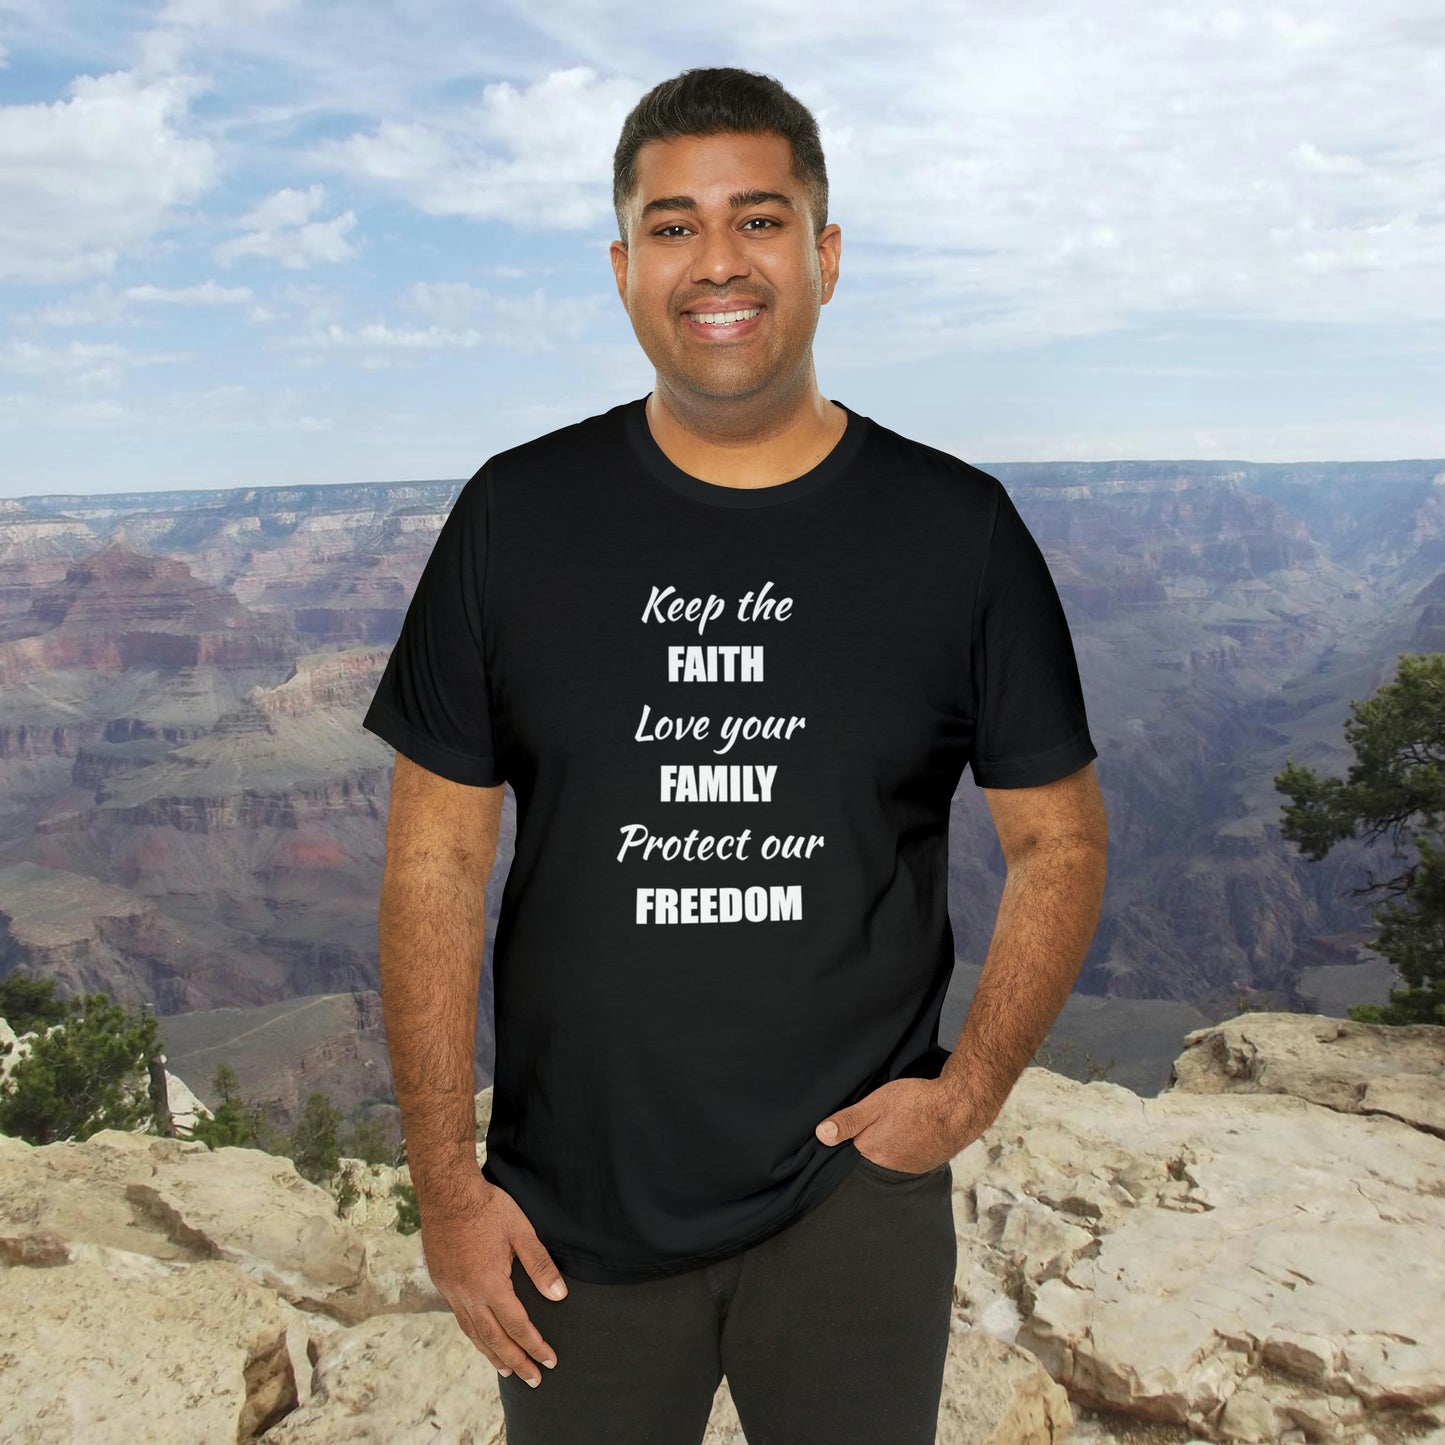 Faith Family Freedom Unisex Jersey Short Sleeve Tee | Christian American USA God Country America Jesus Families Keep Love Protect Religious